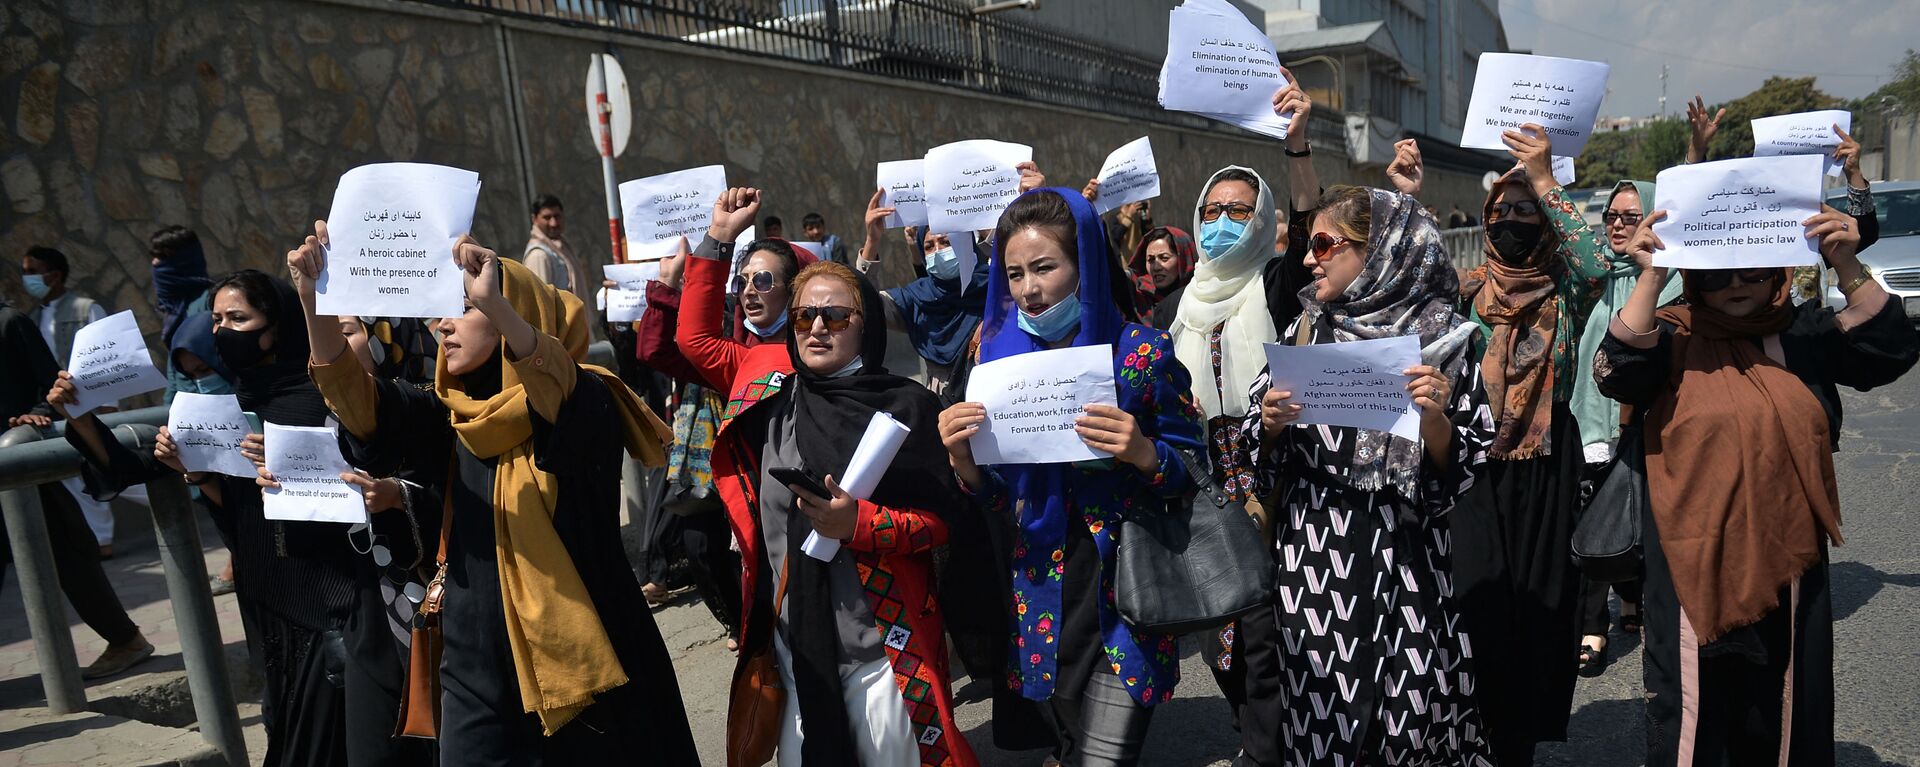 Afghan women take part in a protest march for their rights under the Taliban rule in the downtown area of Kabul on September 3, 2021.  - Sputnik International, 1920, 03.09.2021